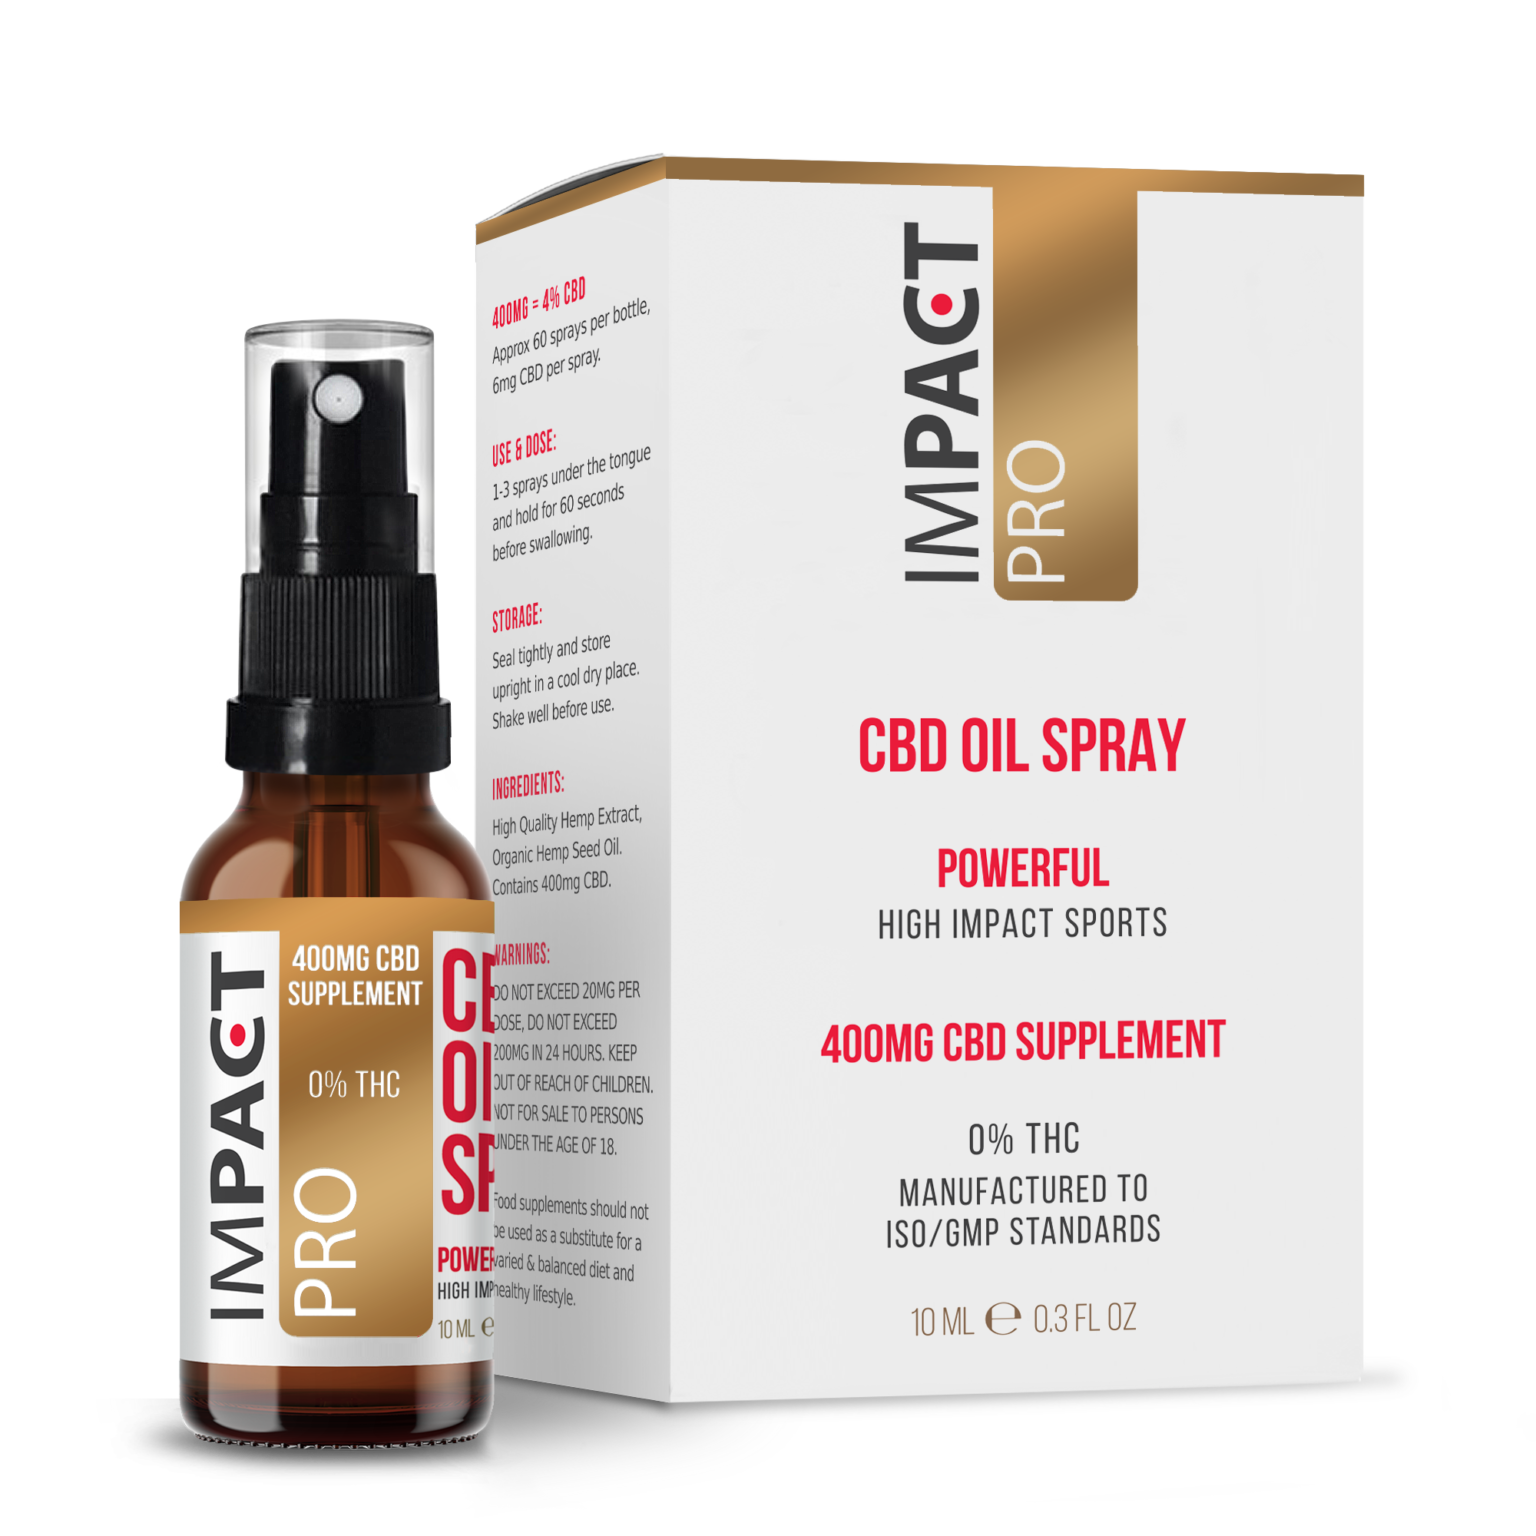 Download IMPACT-CBD-oil-SPRAY-and-BOX-400MG-mock-up-PNG.png - CIITECH